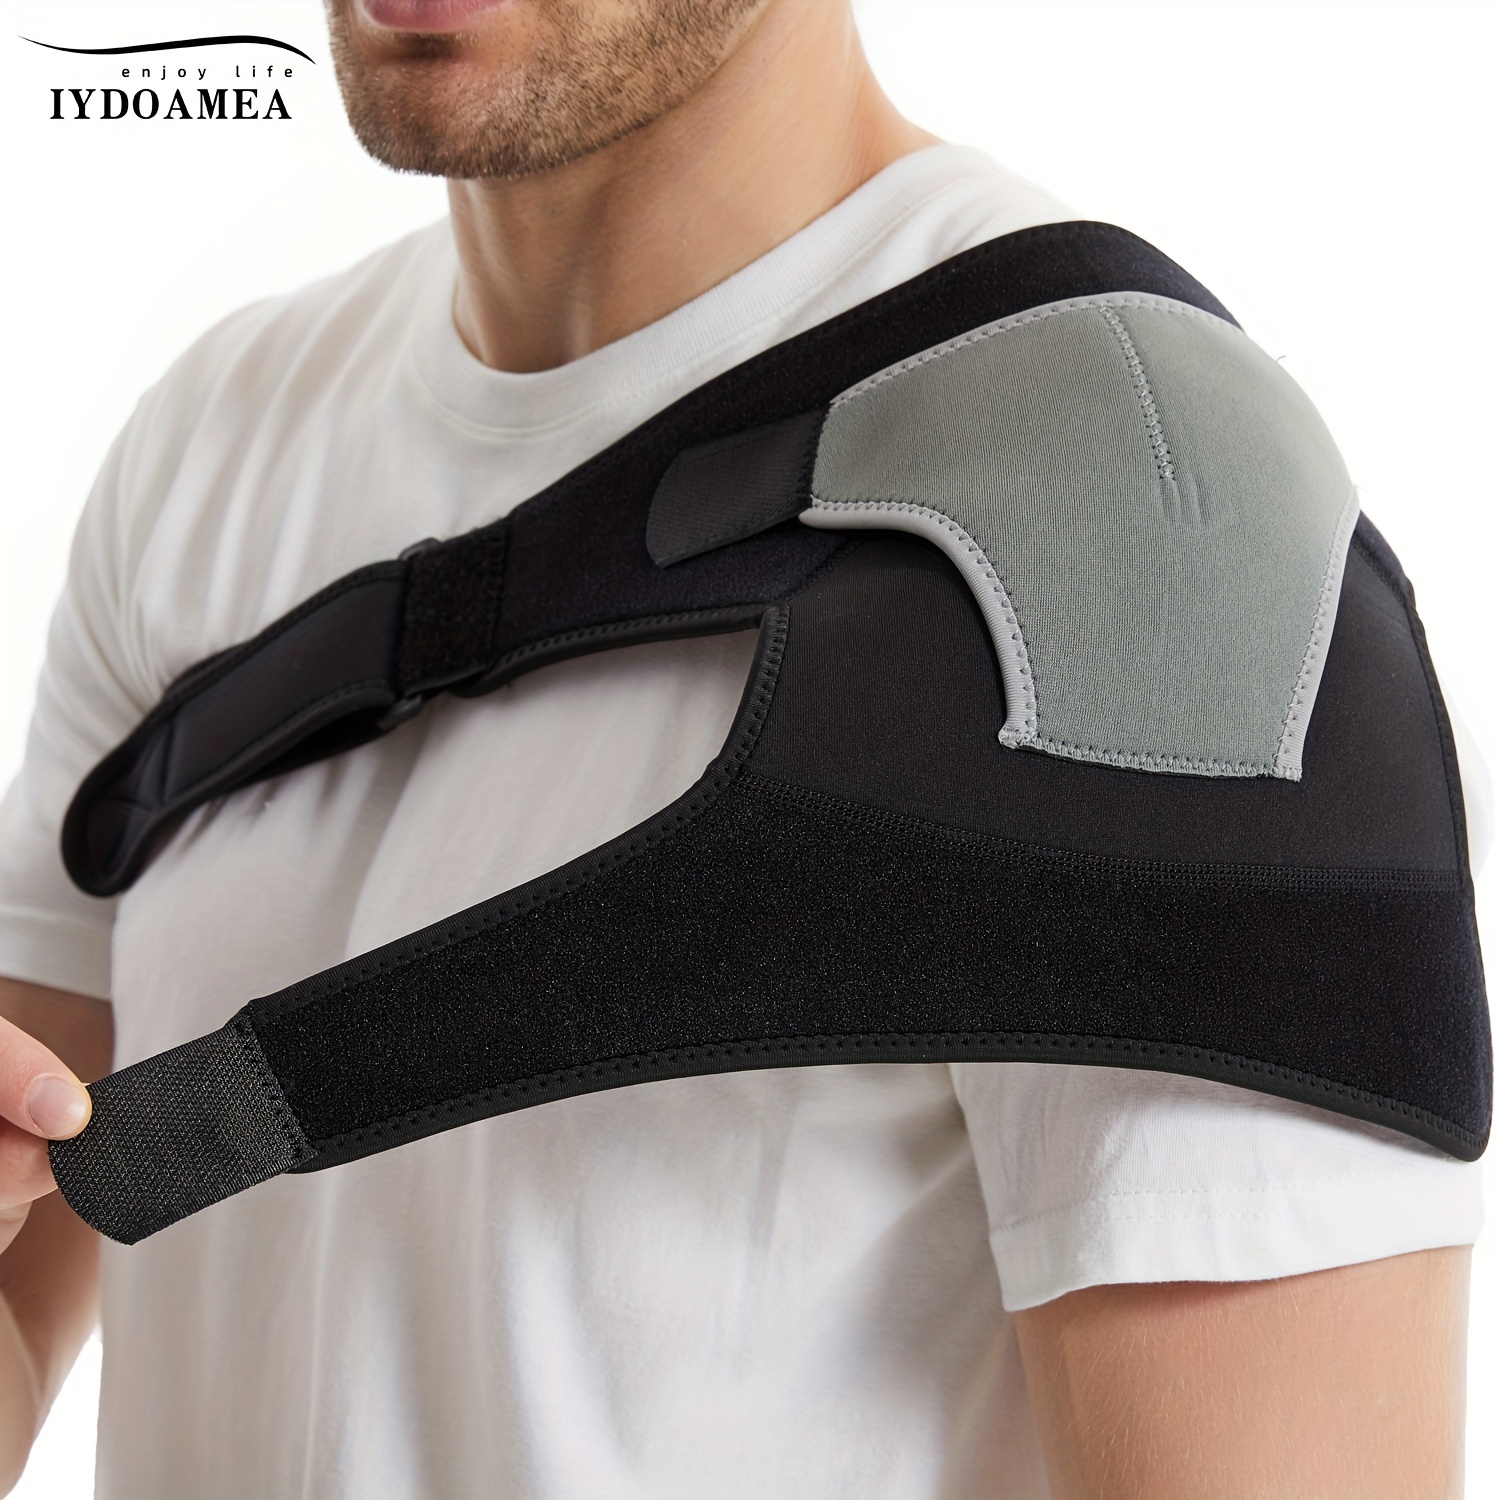 Shoulder Support Brace Neoprene Arm Belt Compression Rotator Cuff Pain  Therapy